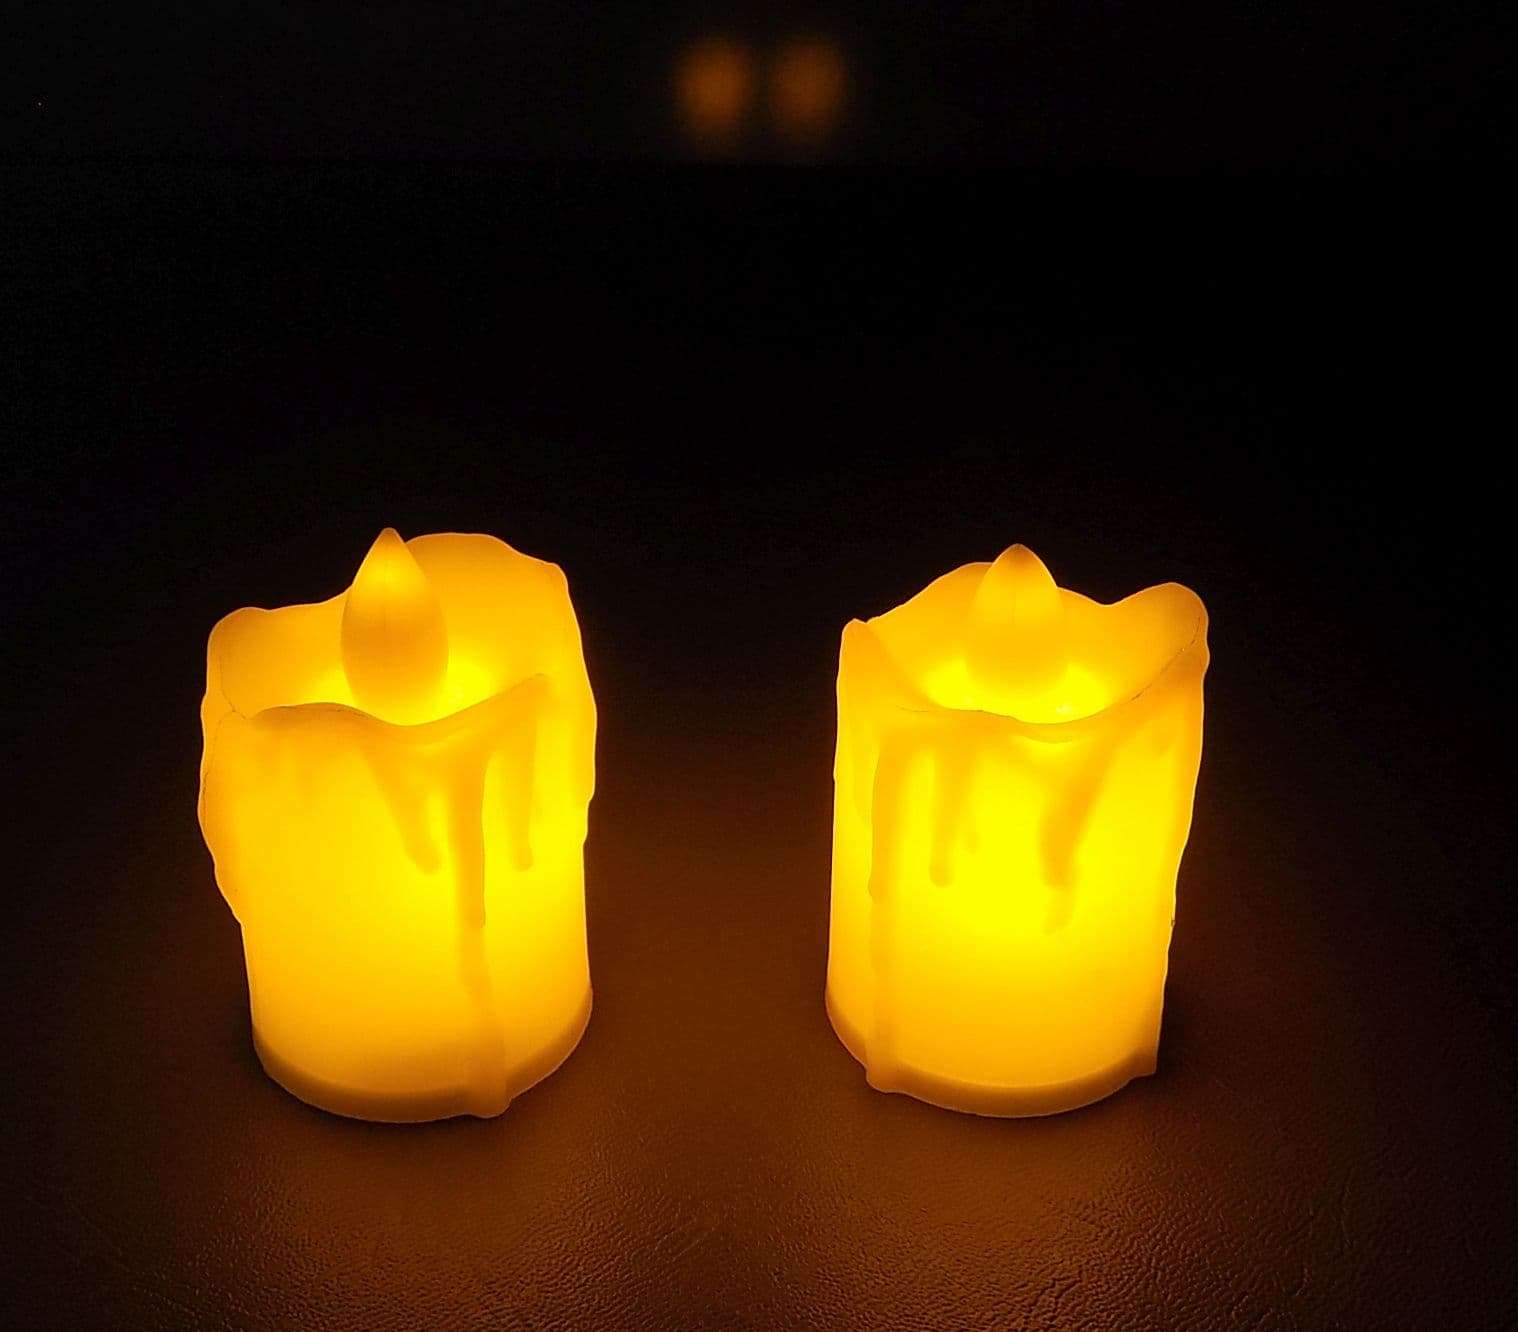 2 Battery Powered LED Plastic Candles 2" High For All Celebrations